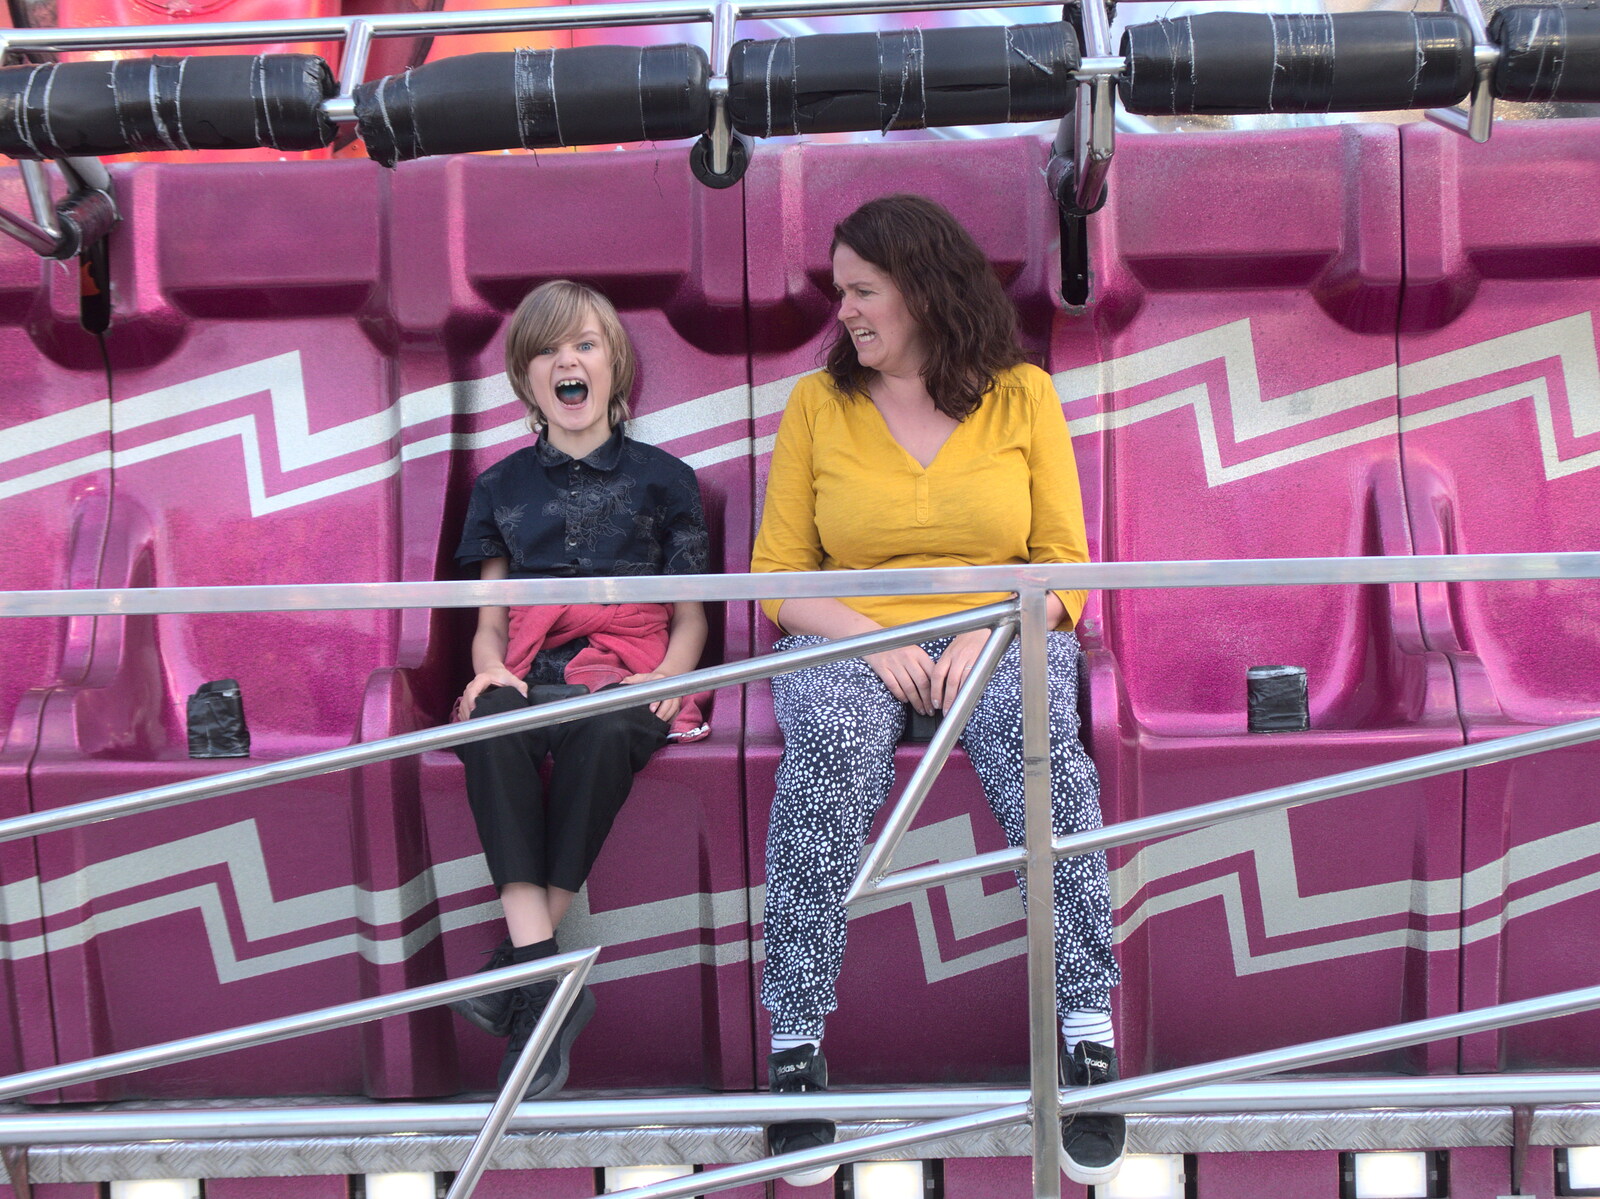 Harry and Isobel wait on the 'Eliminator' from A Few Hours at the Fair, Fair Green, Diss, Norfolk - 5th September 2021